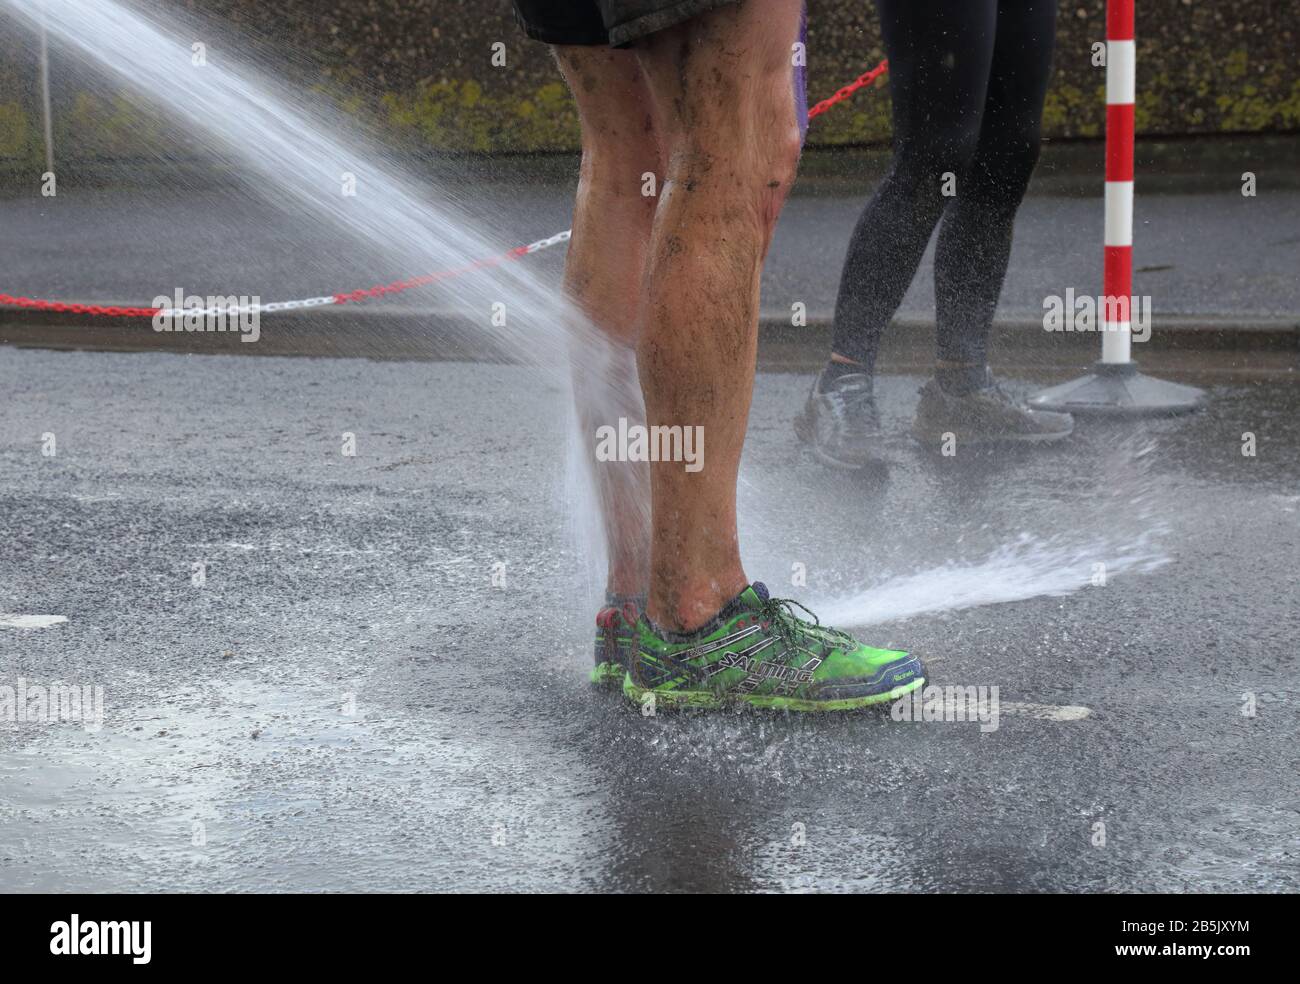 Washing shoes with water hose after finishing multi terrain 20 mile The Grizzly race in Seaton, Devon featuring 2000 runners Stock Photo